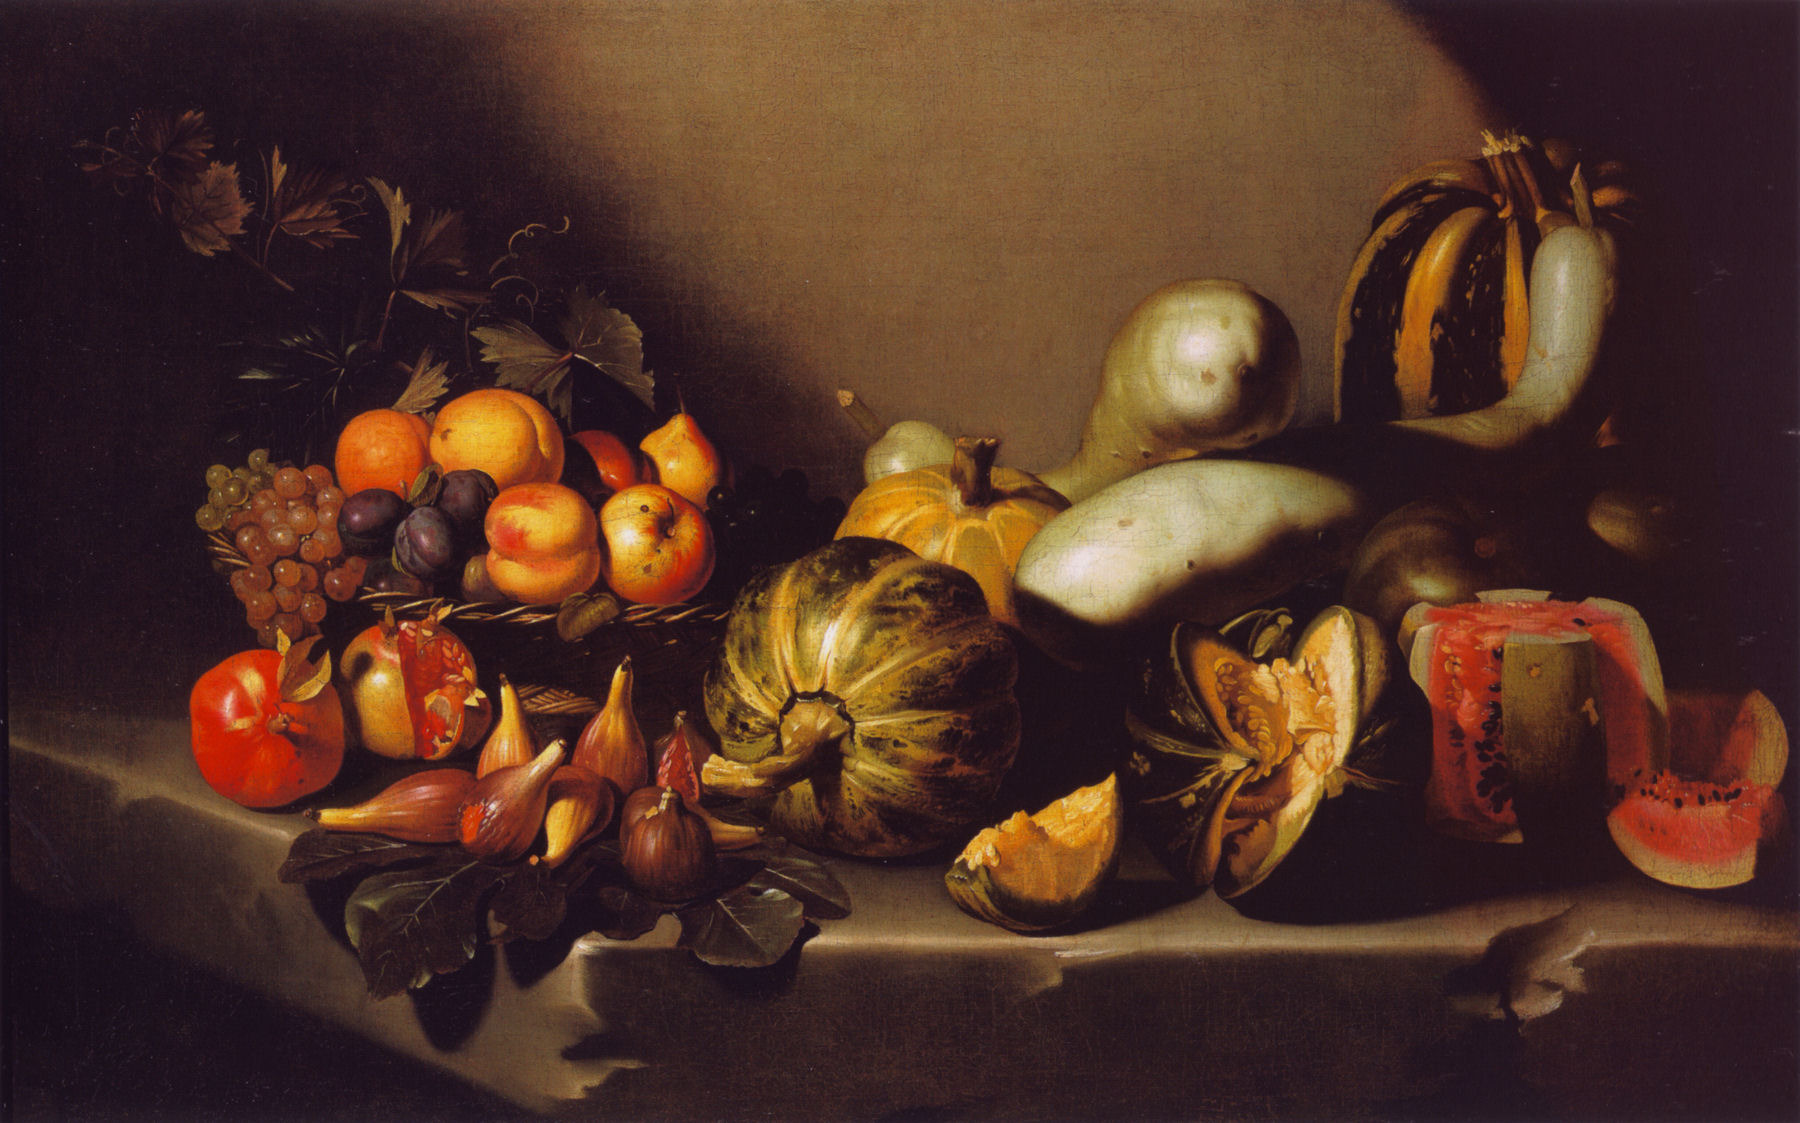 Fichier:Caravaggio - Still Life with Fruit (circa 1603).png 